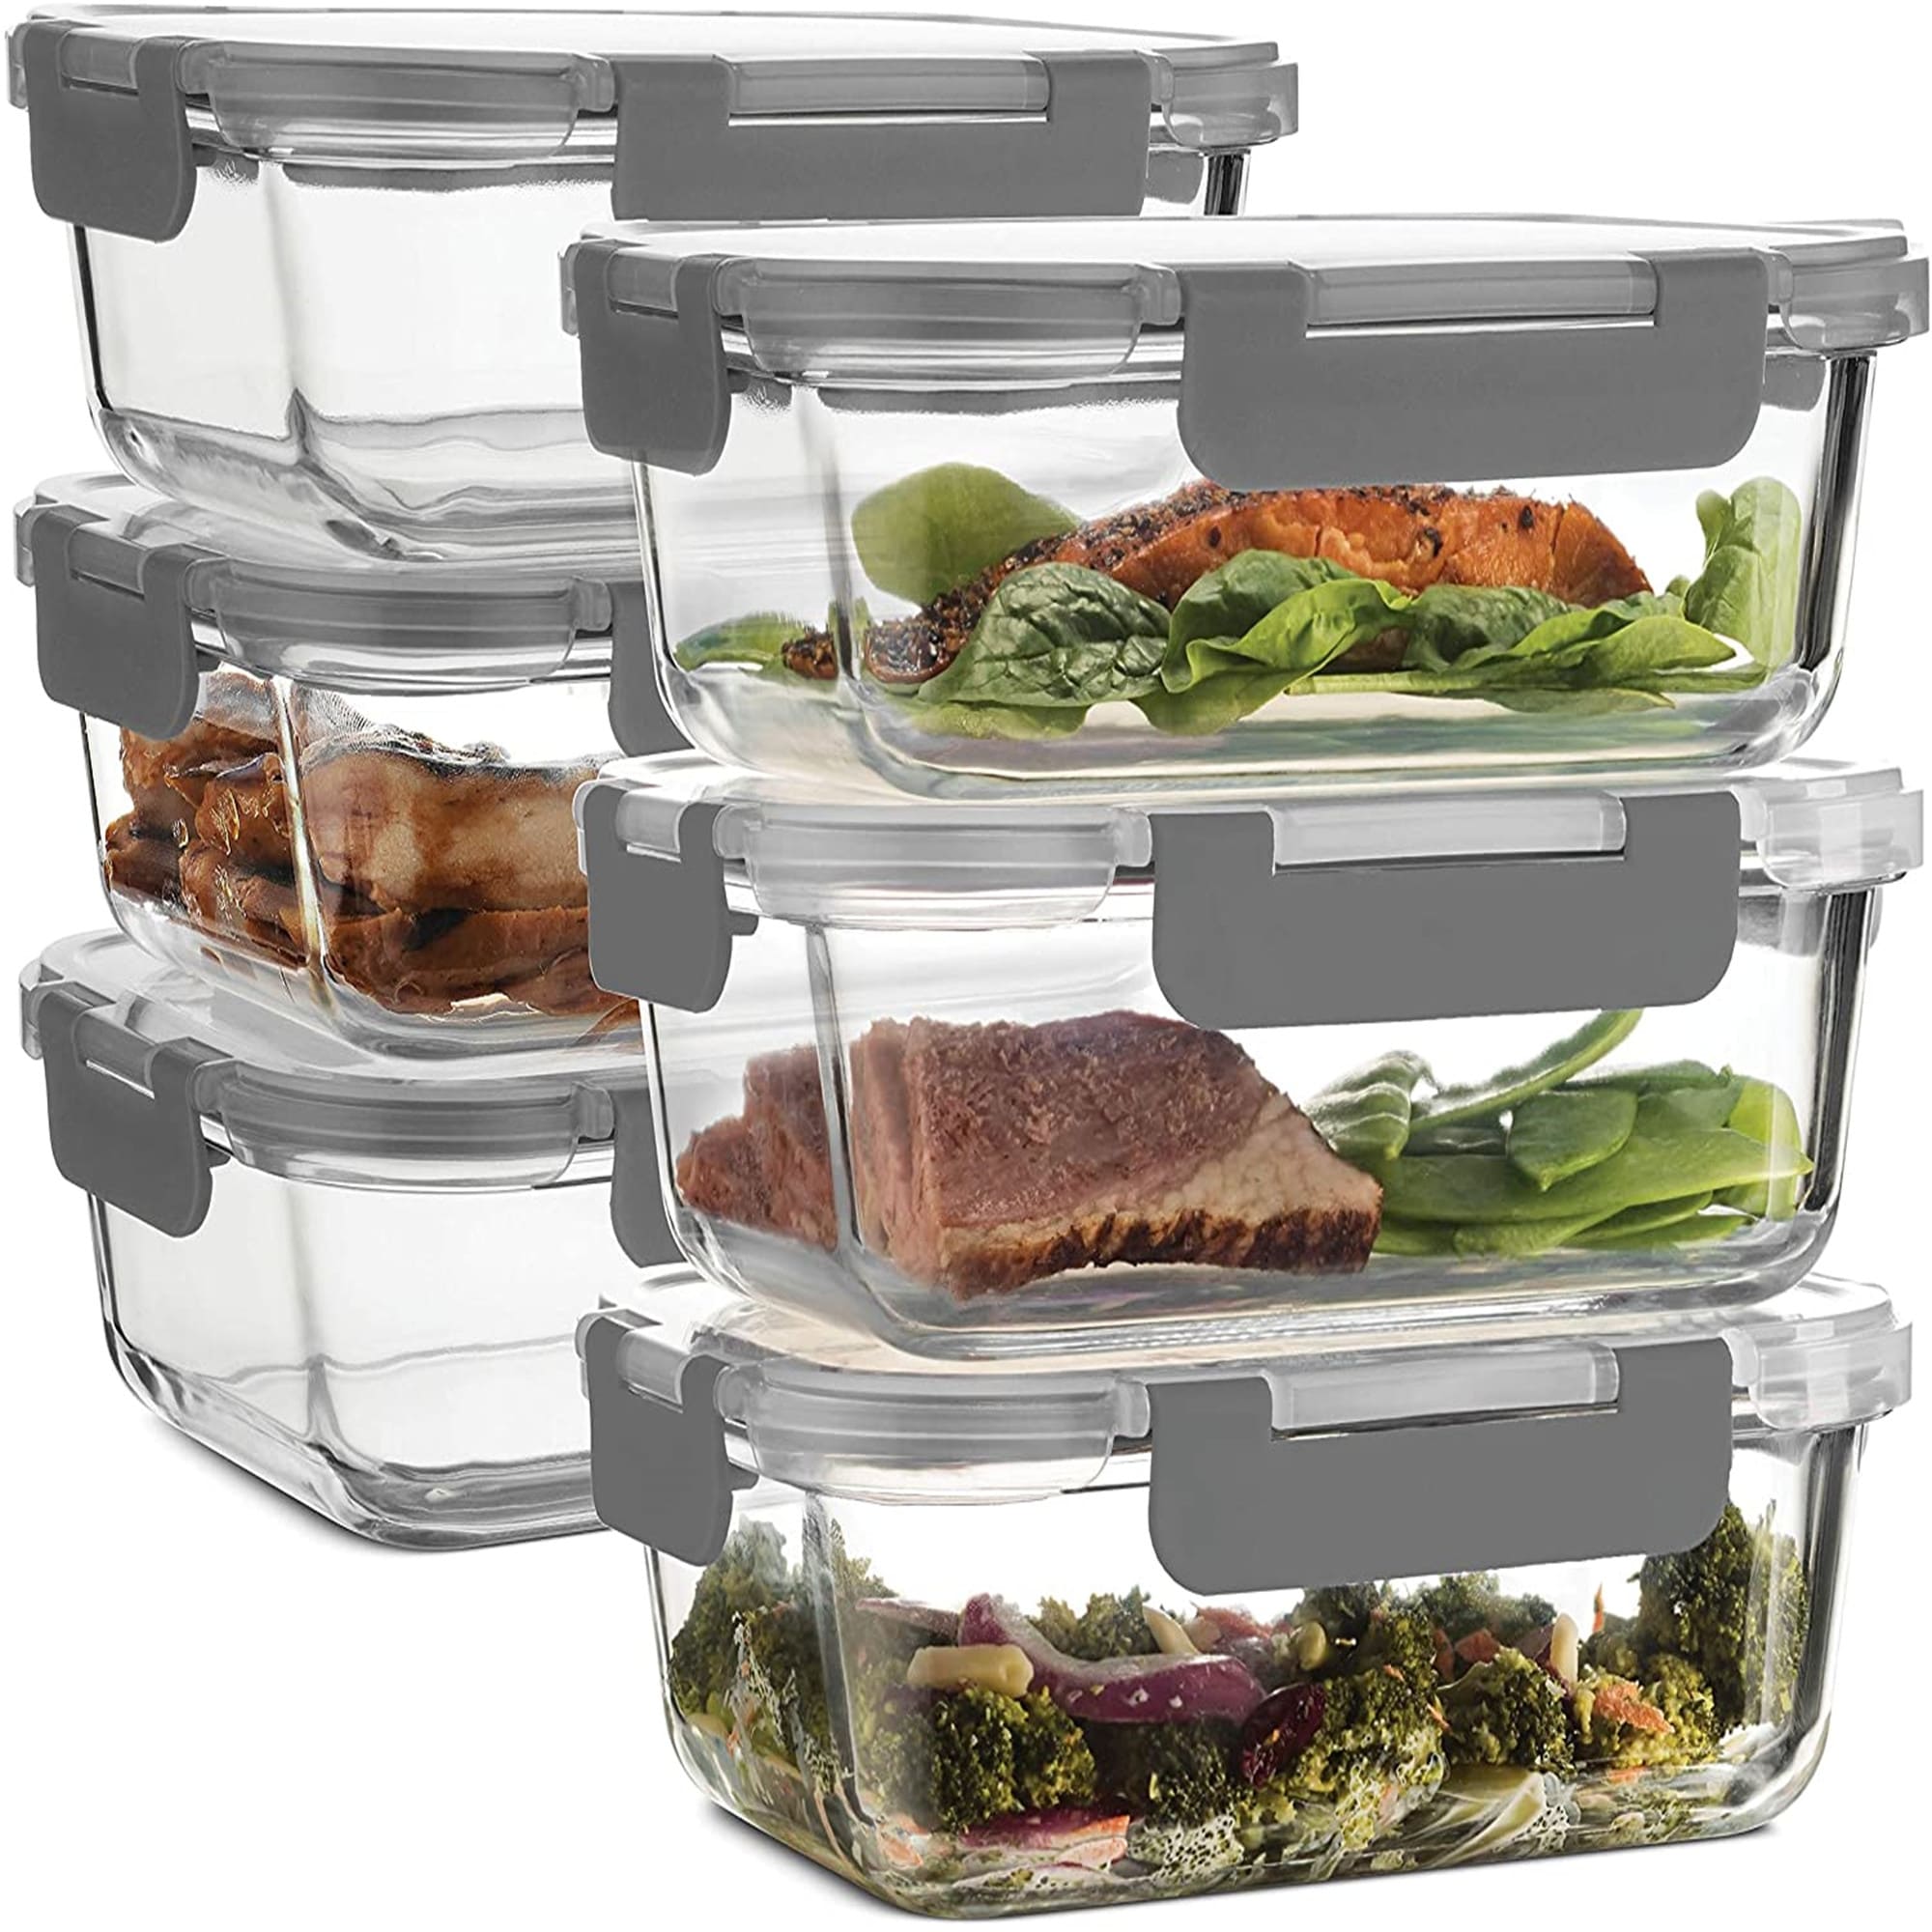 https://ak1.ostkcdn.com/images/products/is/images/direct/5f2690c34492c12ad18c3c7ae5c9aa5e3c81da0d/Superior-Glass-Meal-Prep-Containers---6-pack-%2835oz%29-Newly-Innovated-Hinged-BPA-free-Locking-lids---100%25-Leak-Proof-Glass.jpg